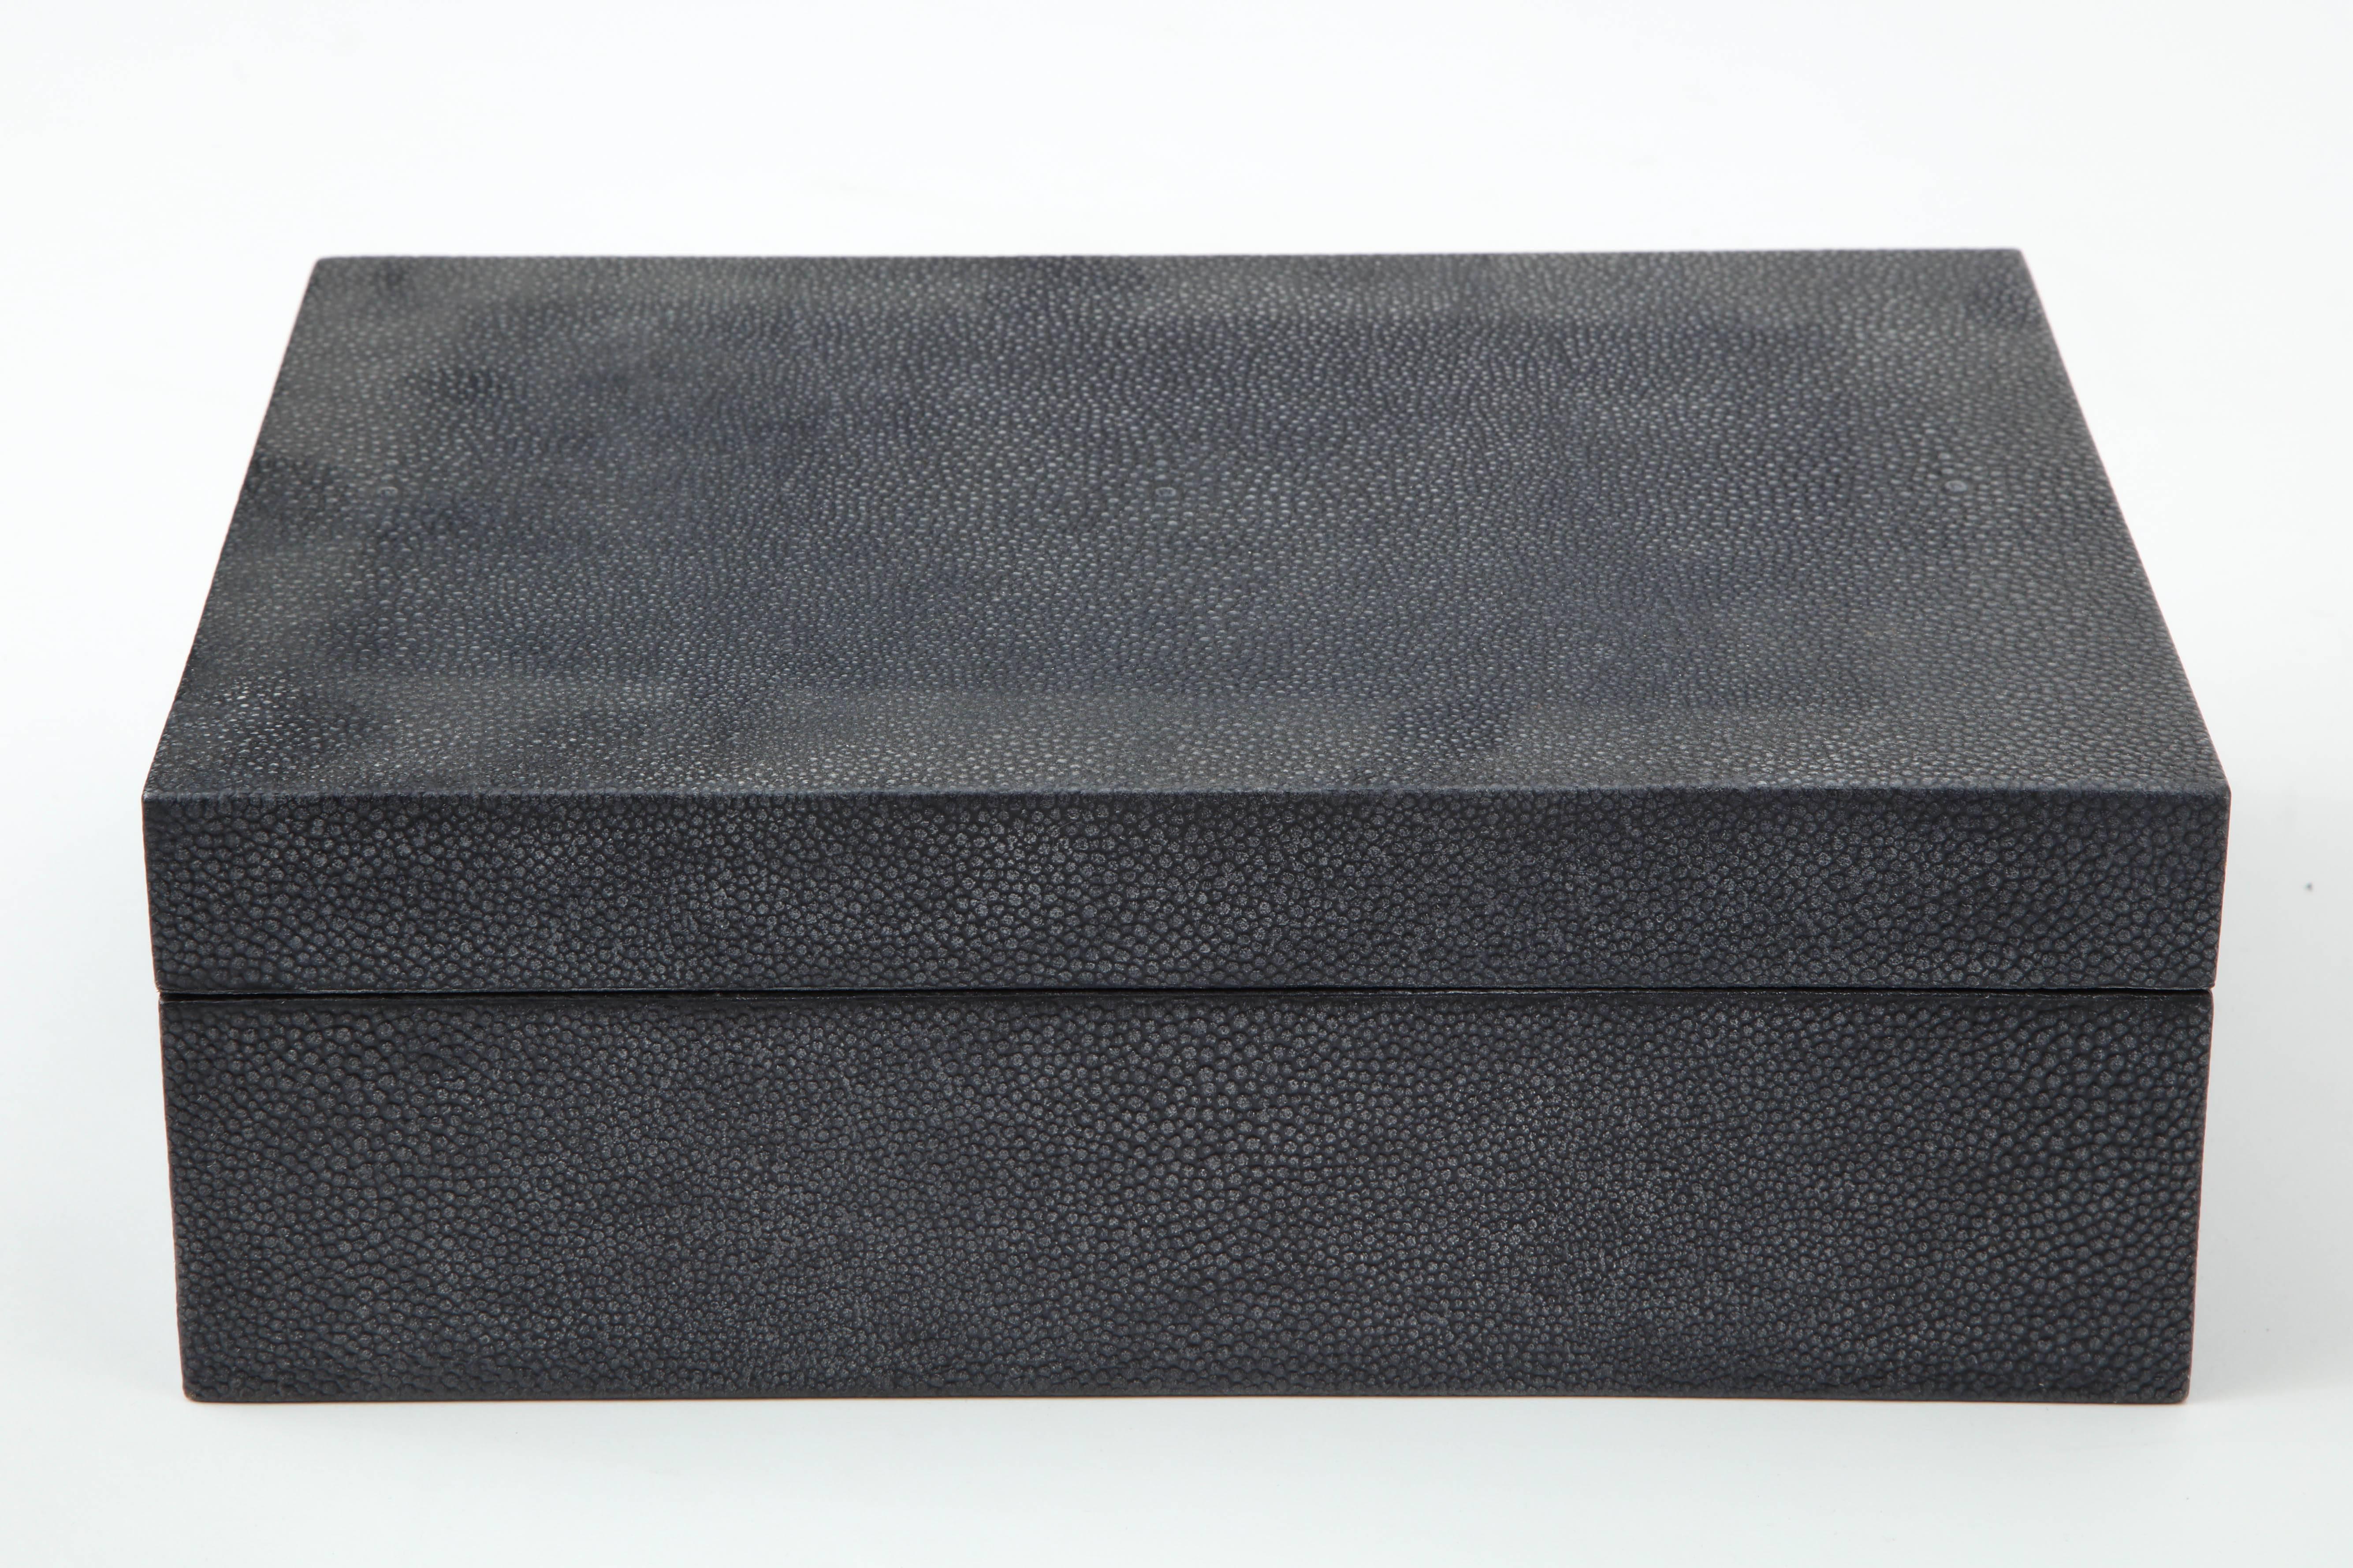 Genuine Grey Shagreen keepsake box with brass hinges perfect for treasures or on a coffee table to store remotes.